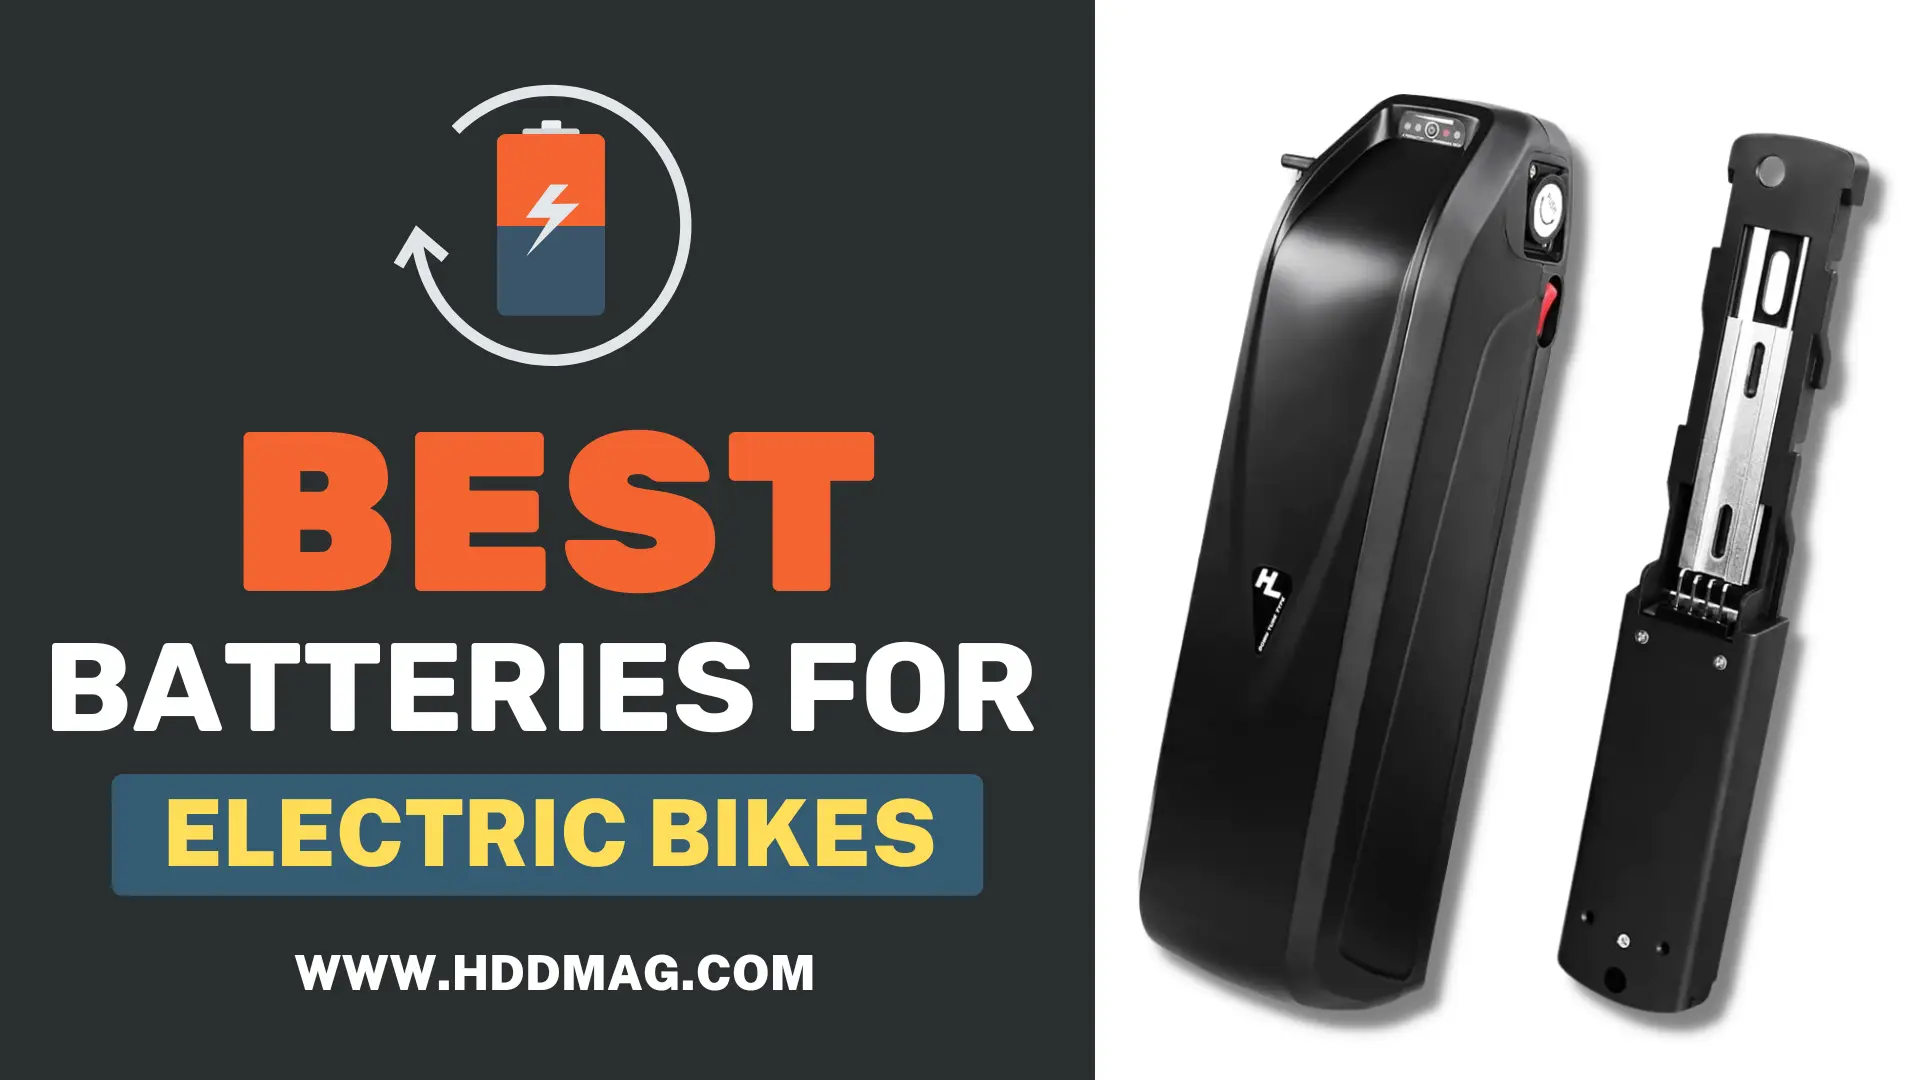 Best Batteries for Electric Bikes